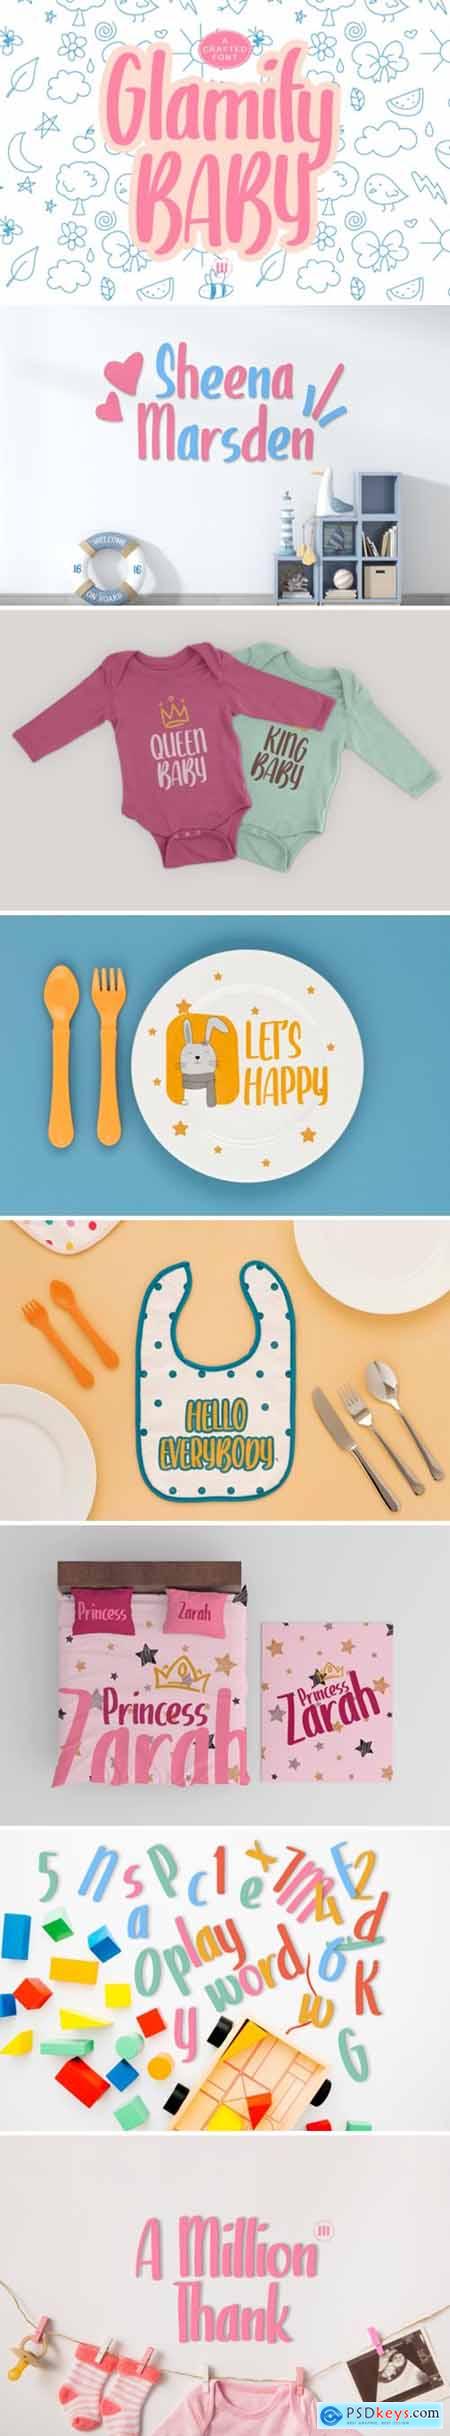 Glamify Baby Font